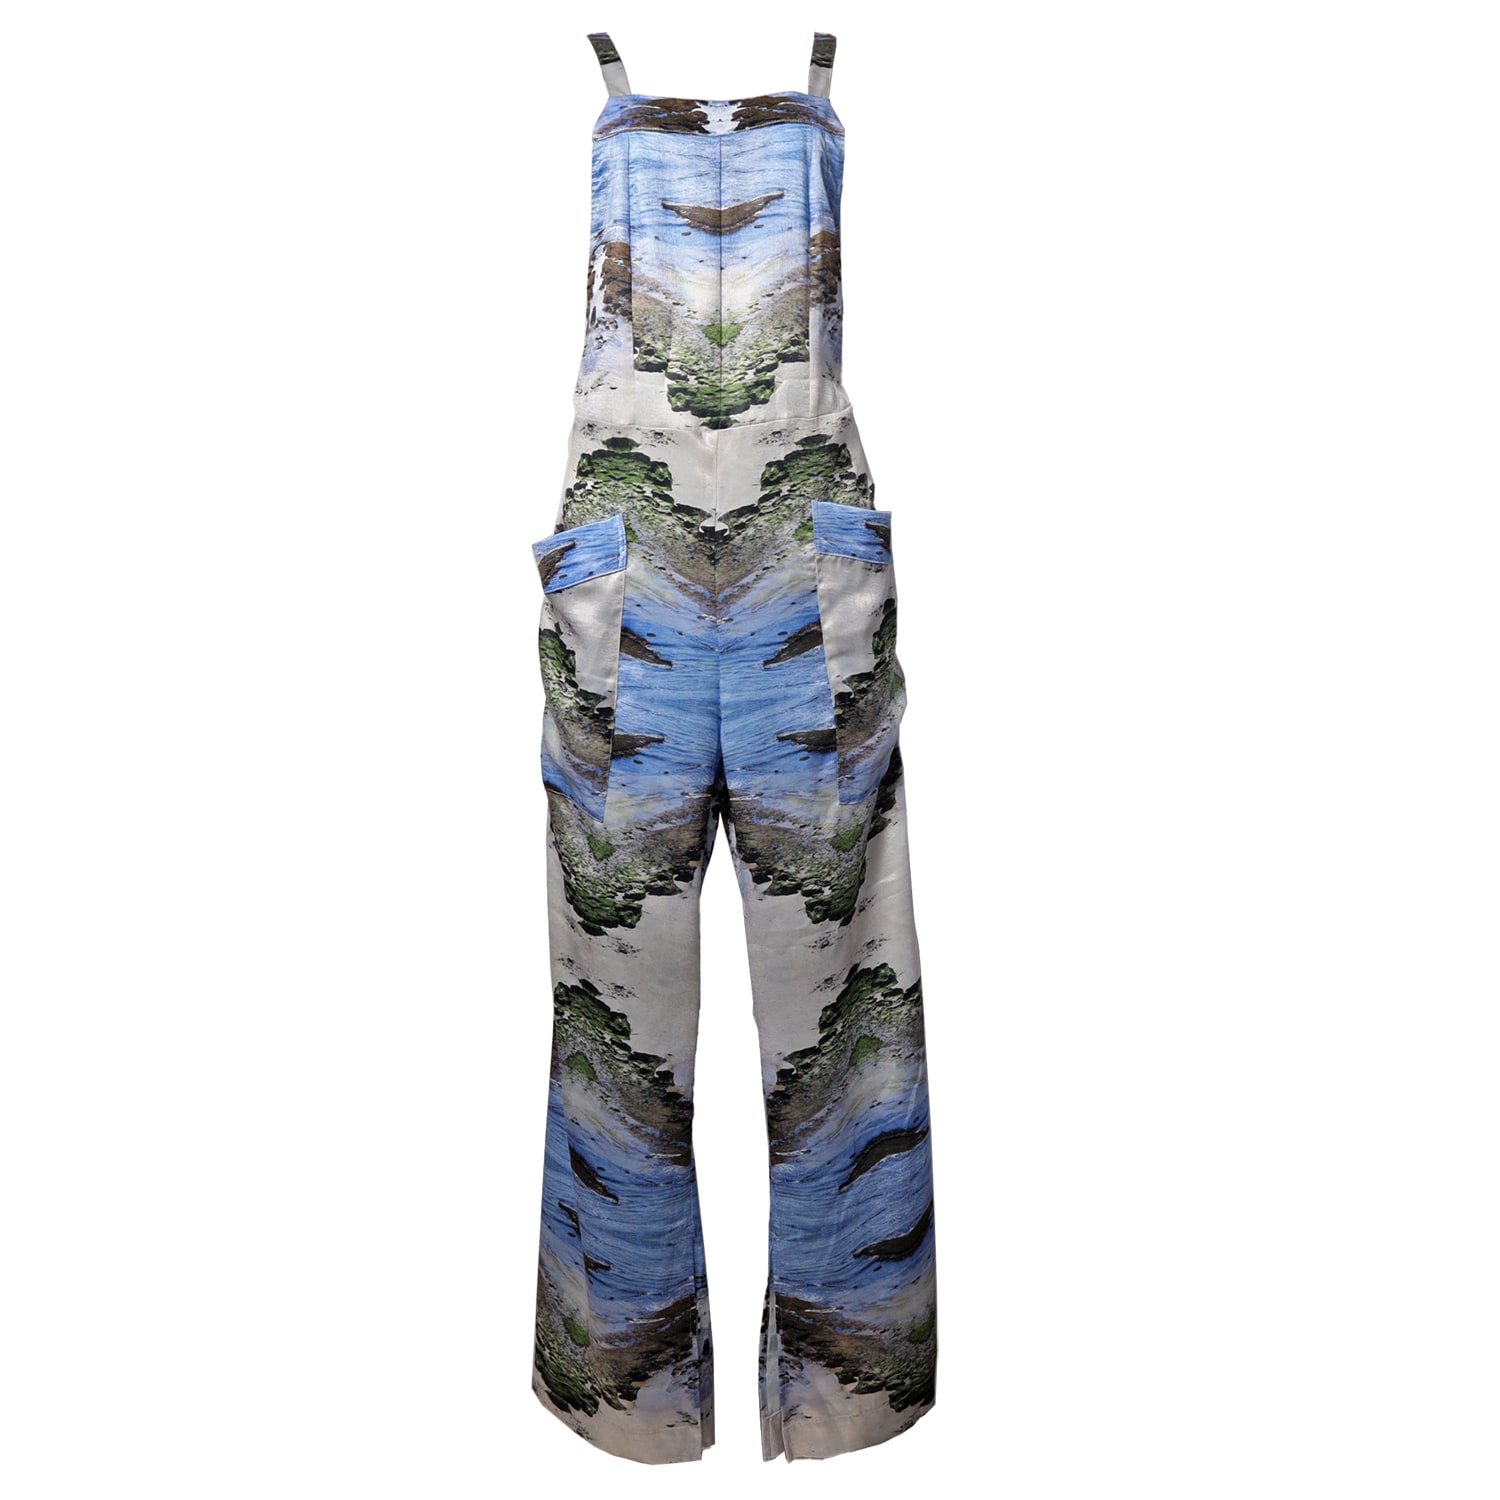 Women’s Neutrals / Blue / Green Velvet Fever Jumpsuit - Sand, Water, Moss Print Extra Small Babs Boutique Nyc